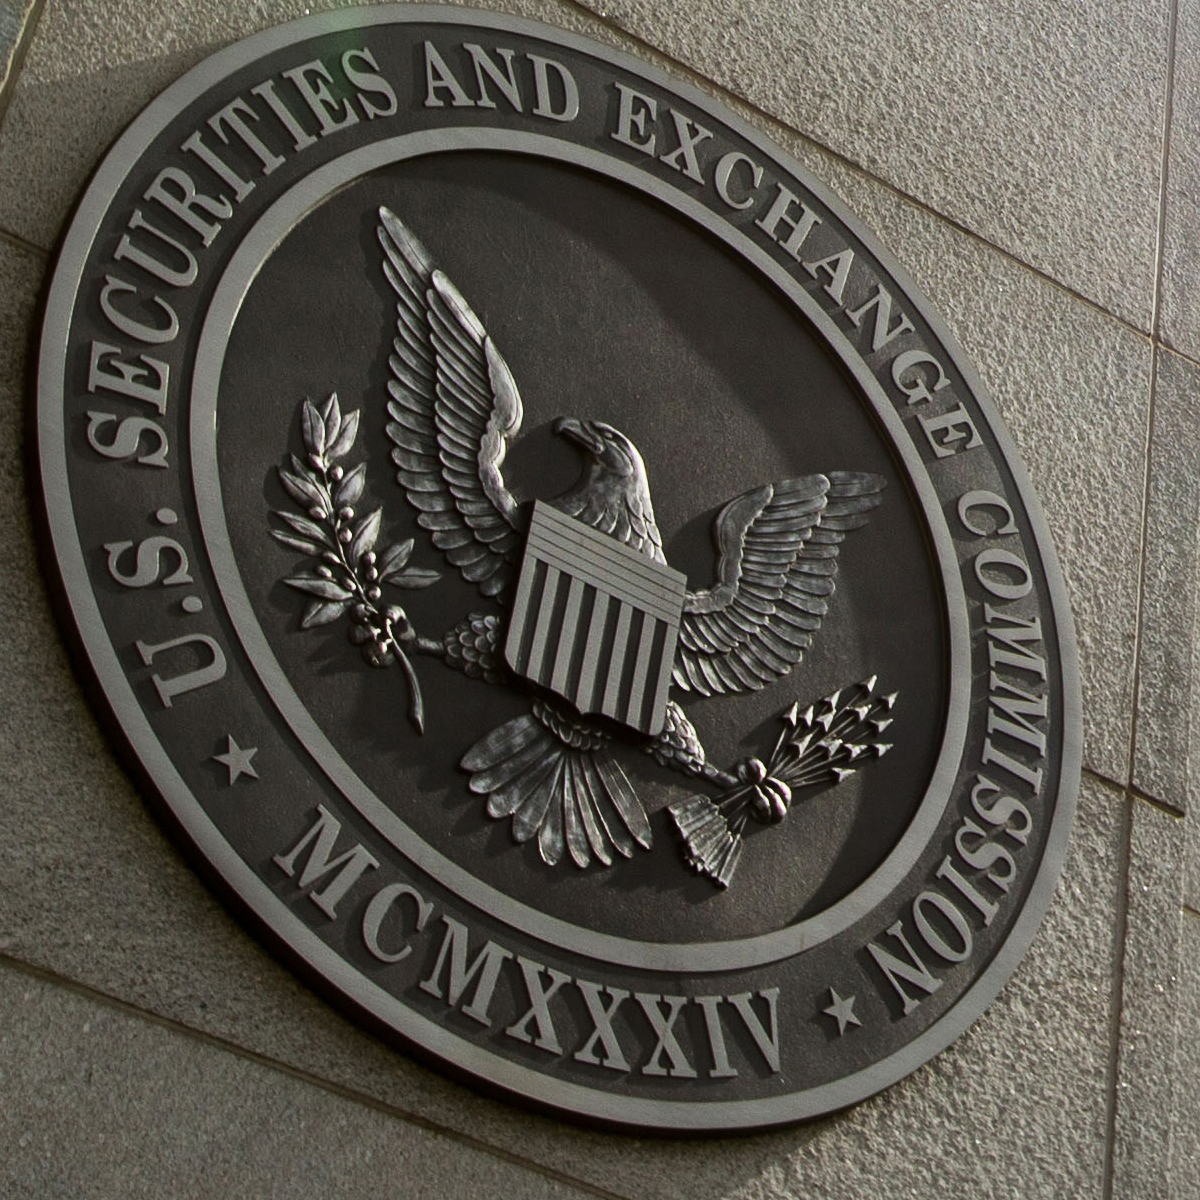 SEC Publishes Warning Against Unlawful Crypto Exchanges